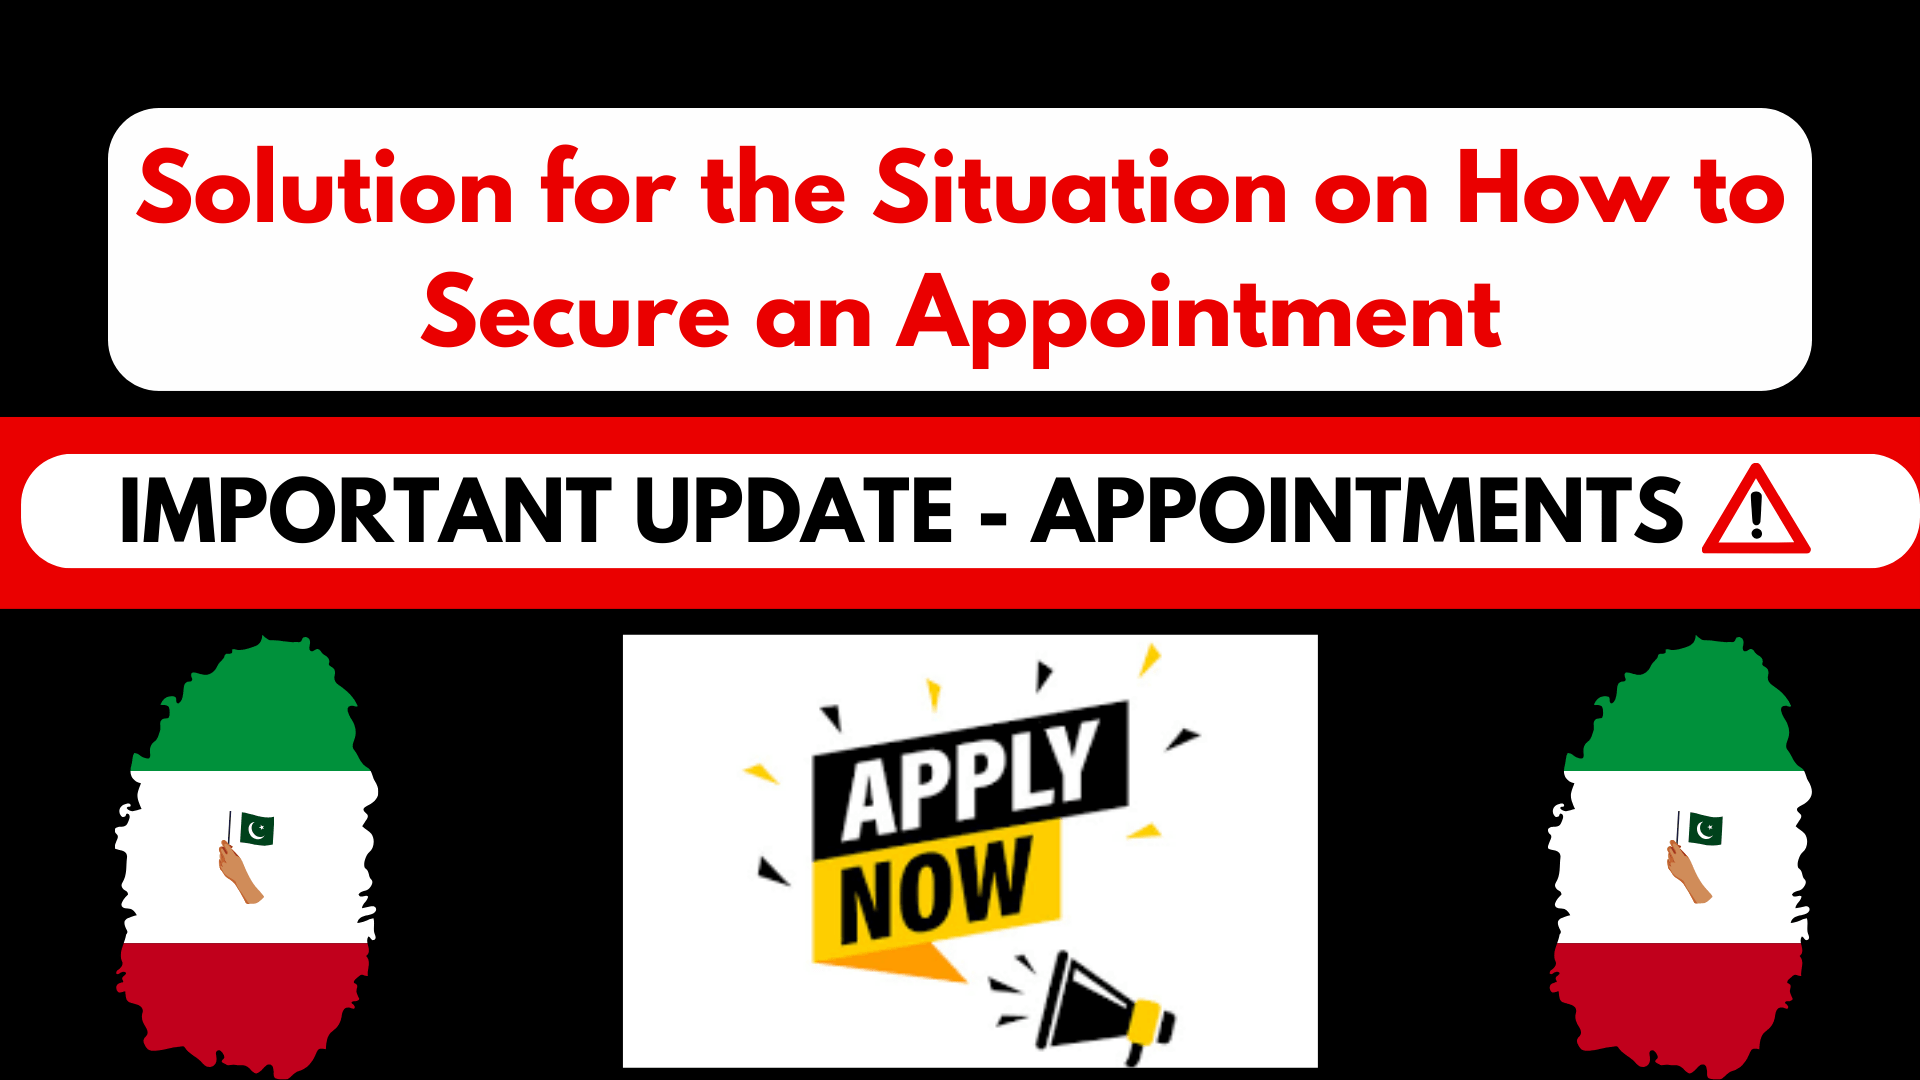 solution for this situation on how to secure an appointment